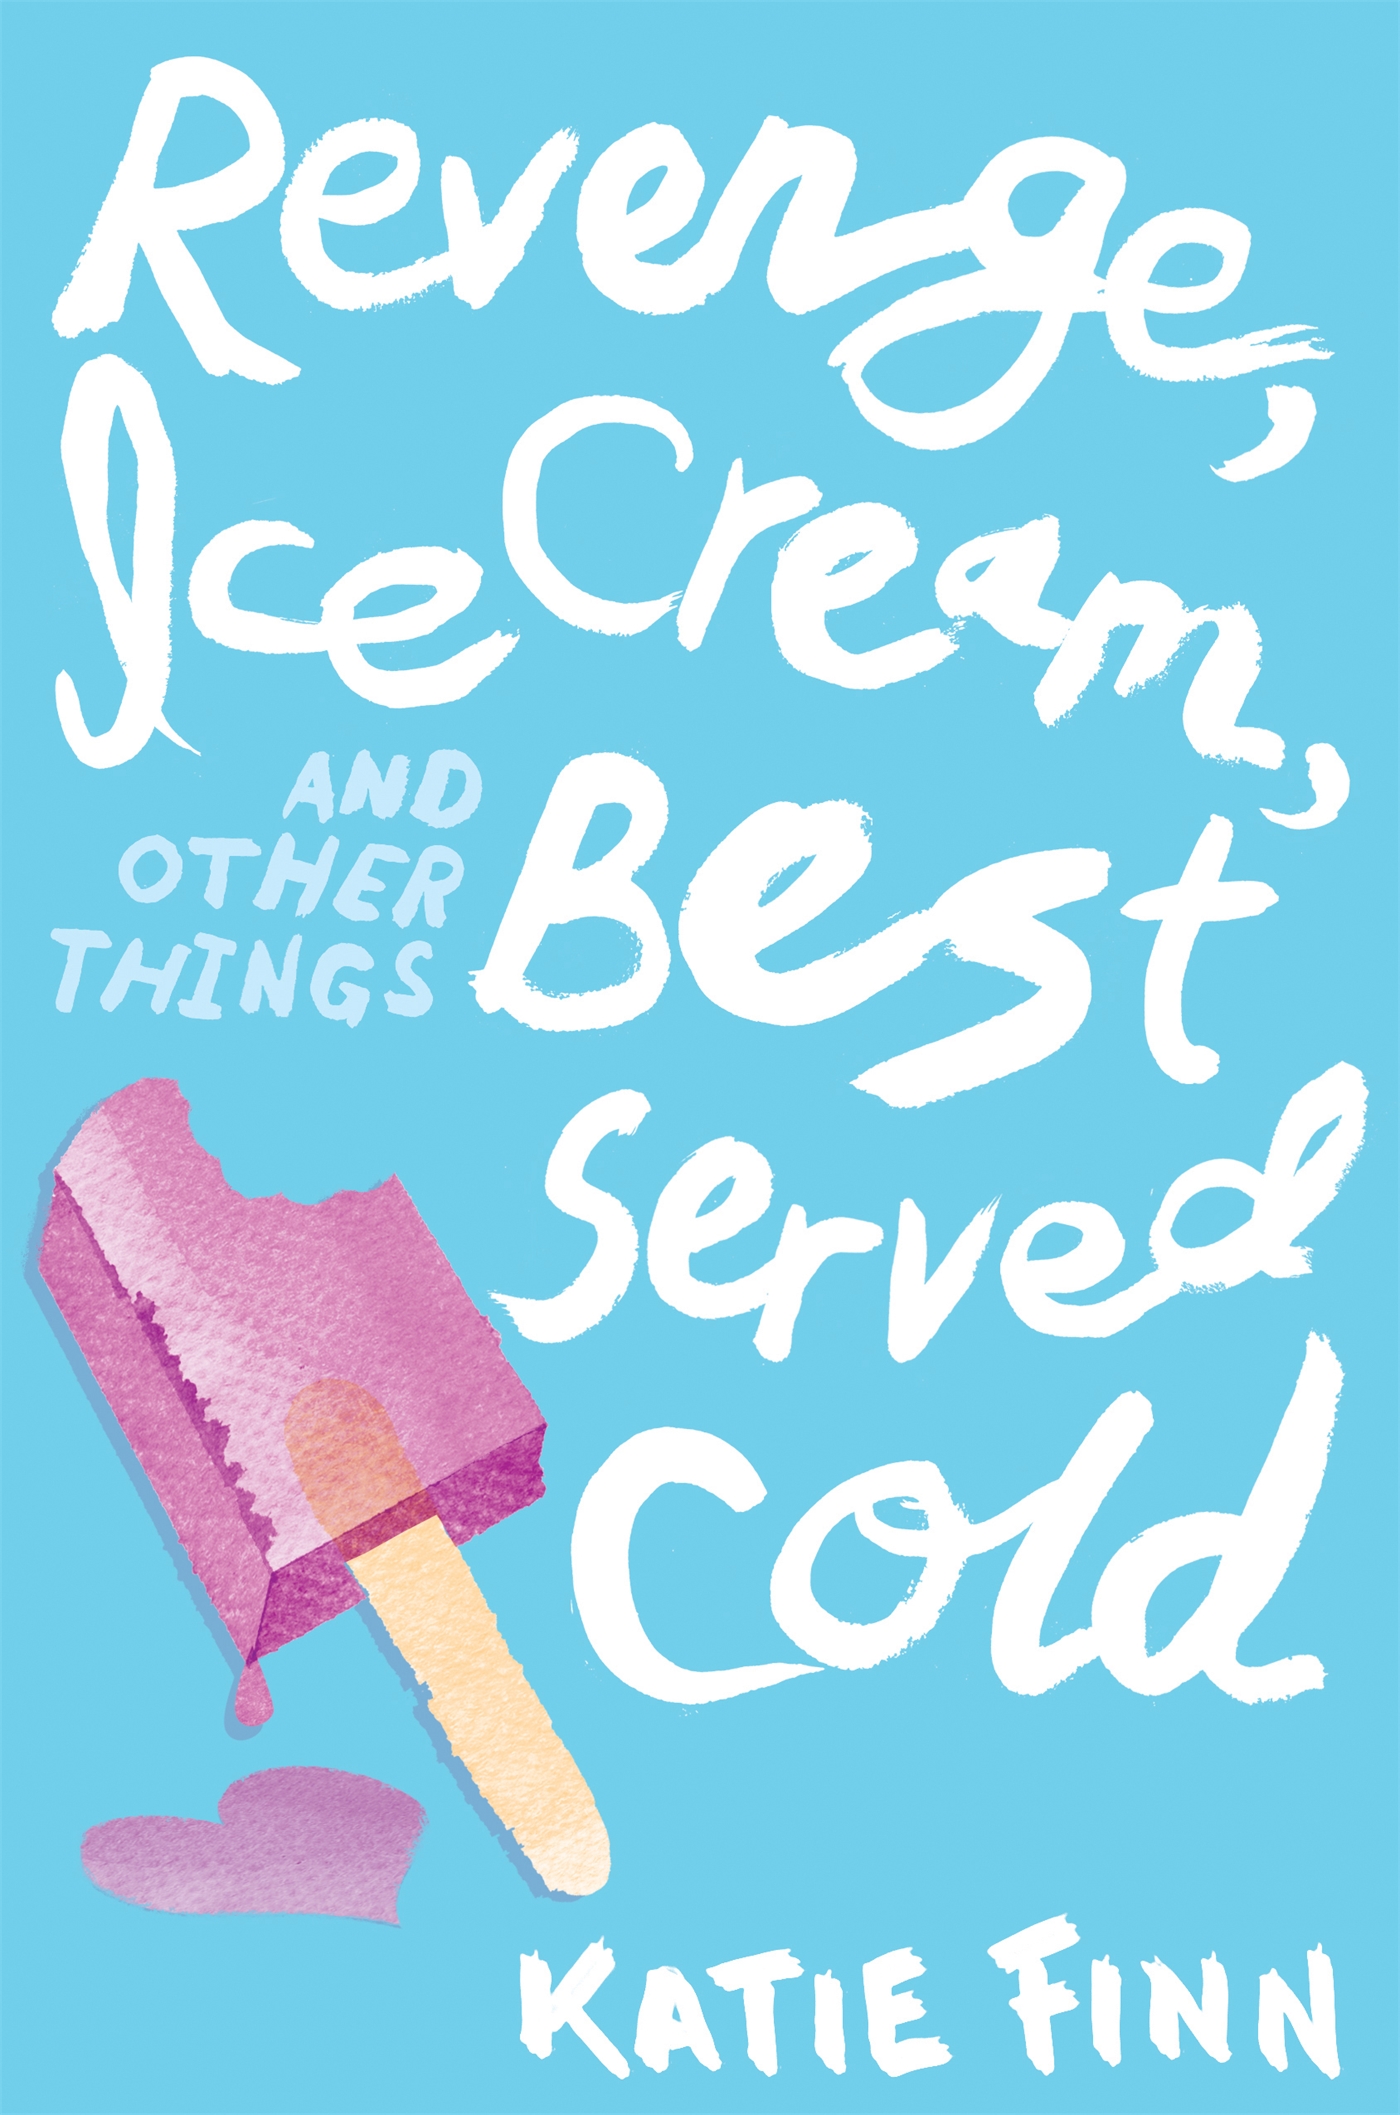 Revenge, ice cream, and other things best served cold cover image